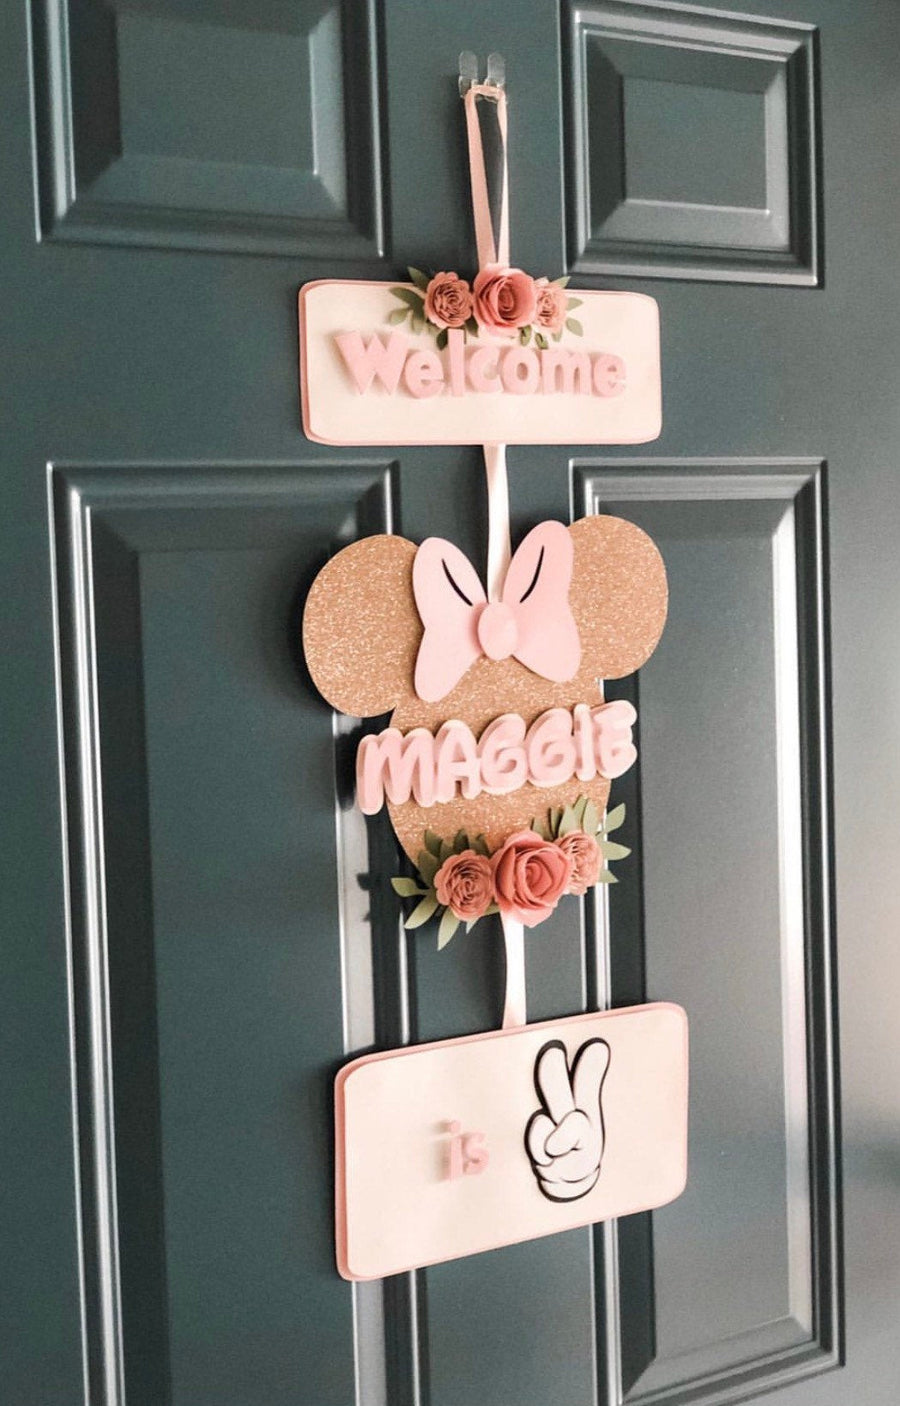 Minnie Mouse door sign, Minnie Mouse banner, floral minnie mouse party decor, Minnie Mouse floral decor, Minnie Mouse party package